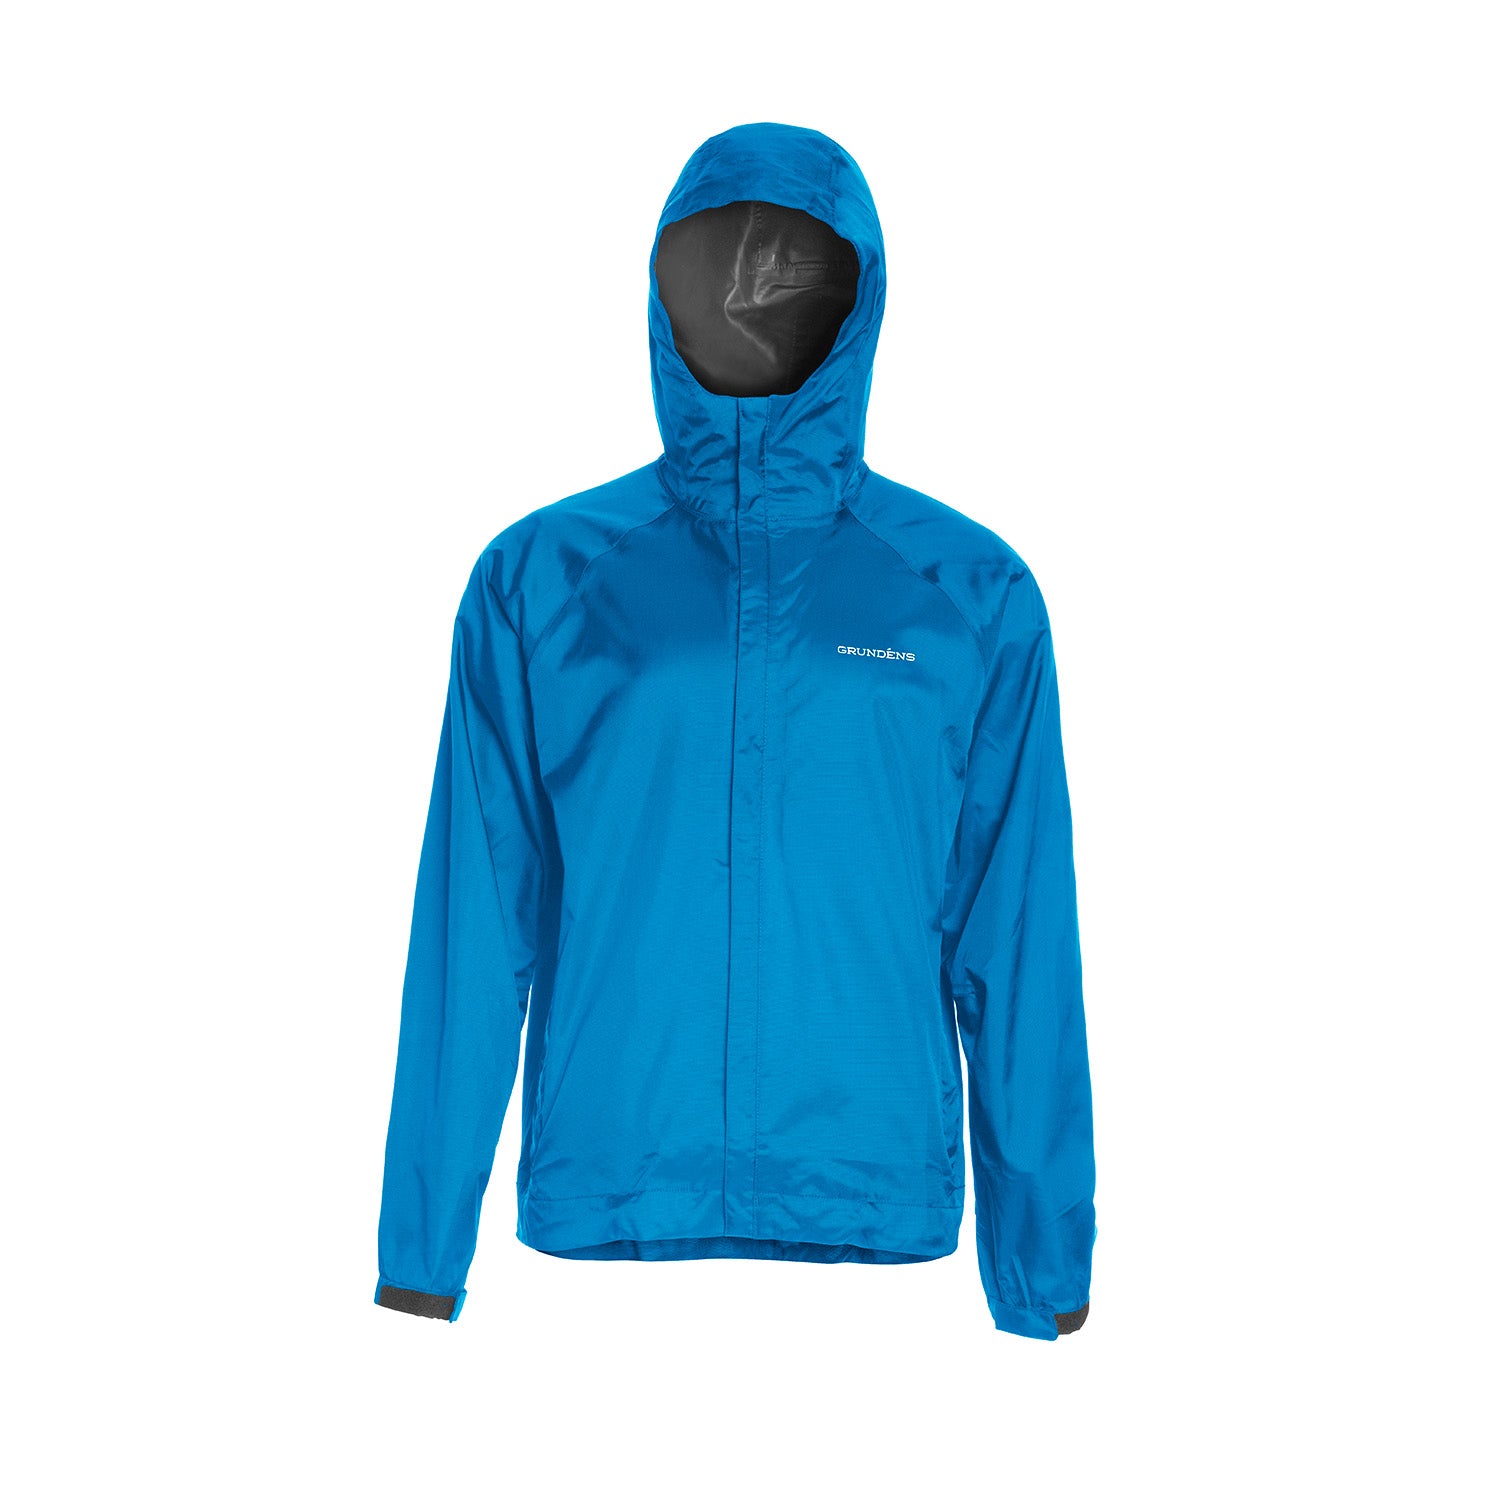 Introducing The Discovery Division Grundéns Jacket – Moment Surf